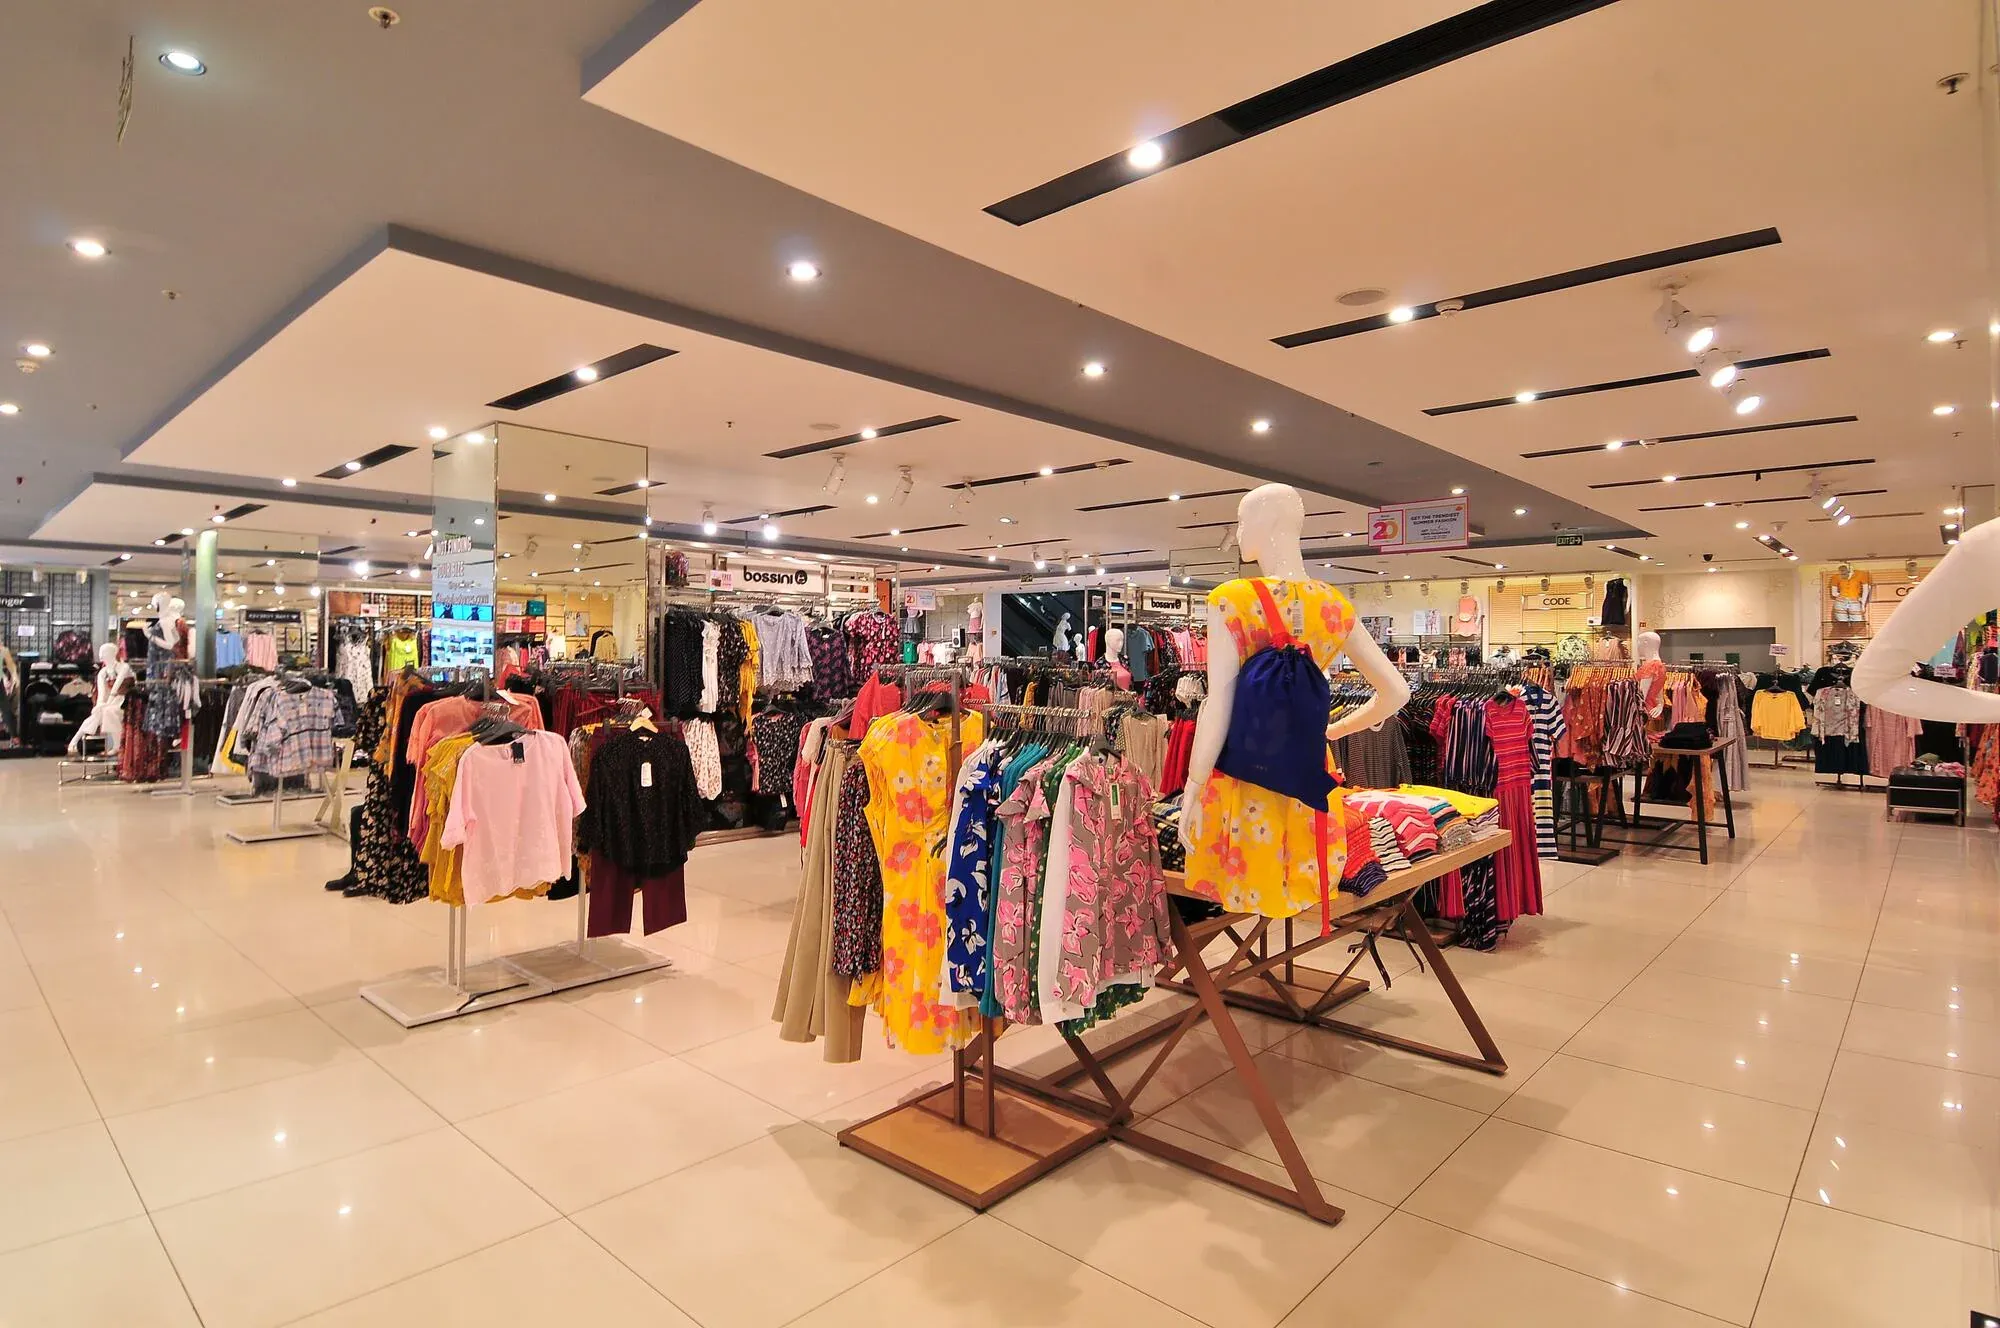 Lifestyle Stores in India, central_asia | Handbags,Accessories,Clothes,Home Decor,Cosmetics,Sportswear - Country Helper